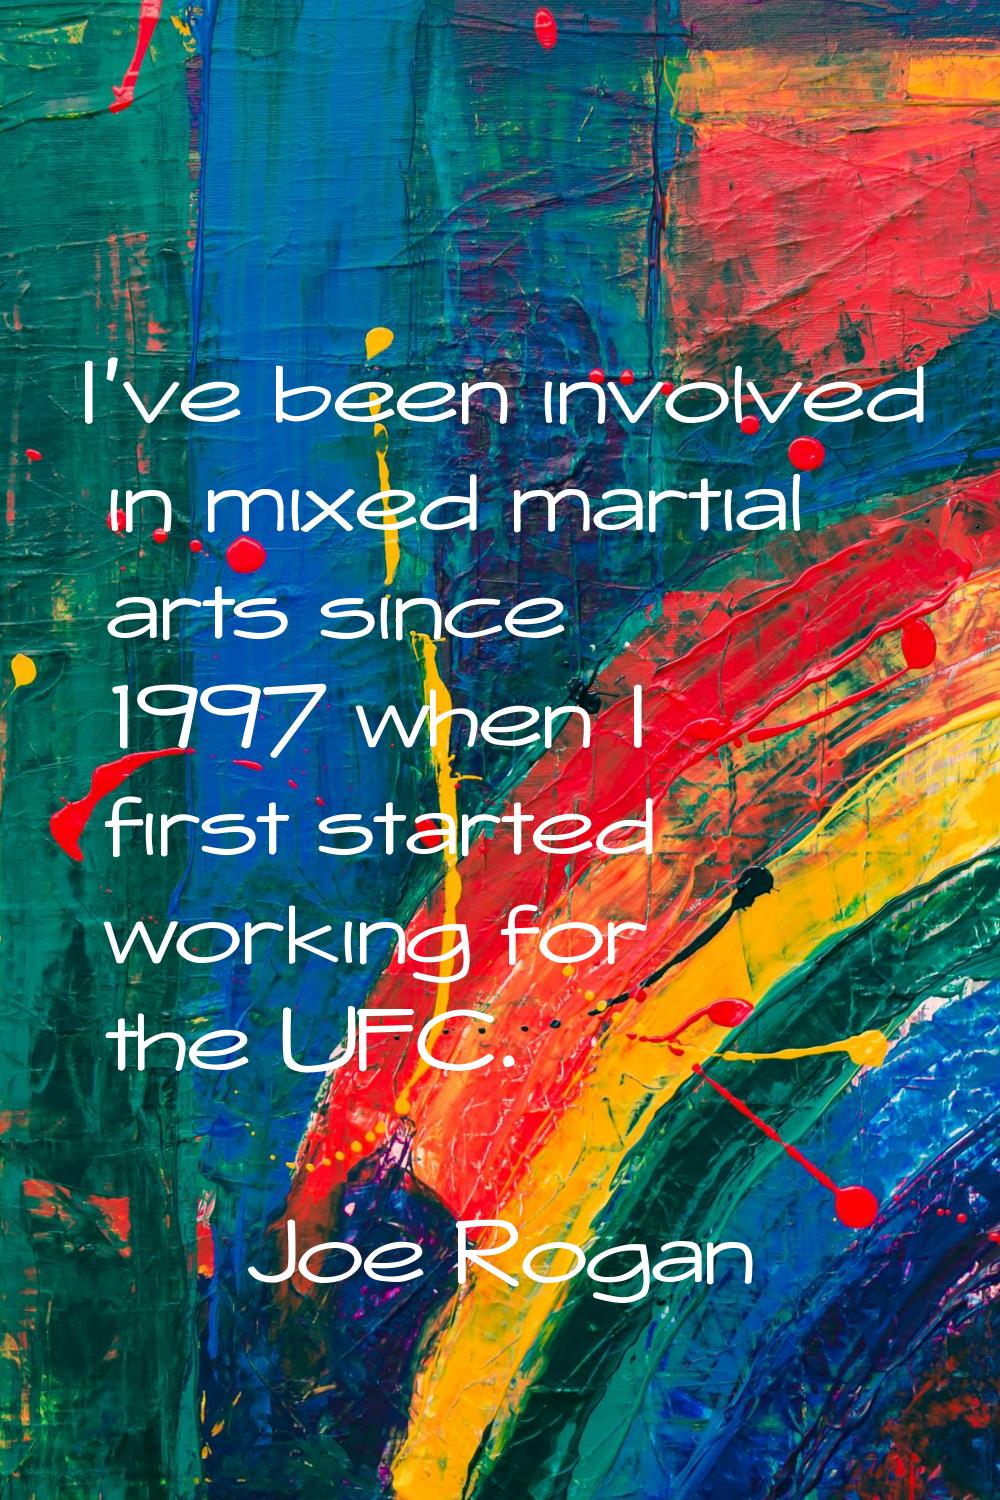 I've been involved in mixed martial arts since 1997 when I first started working for the UFC.